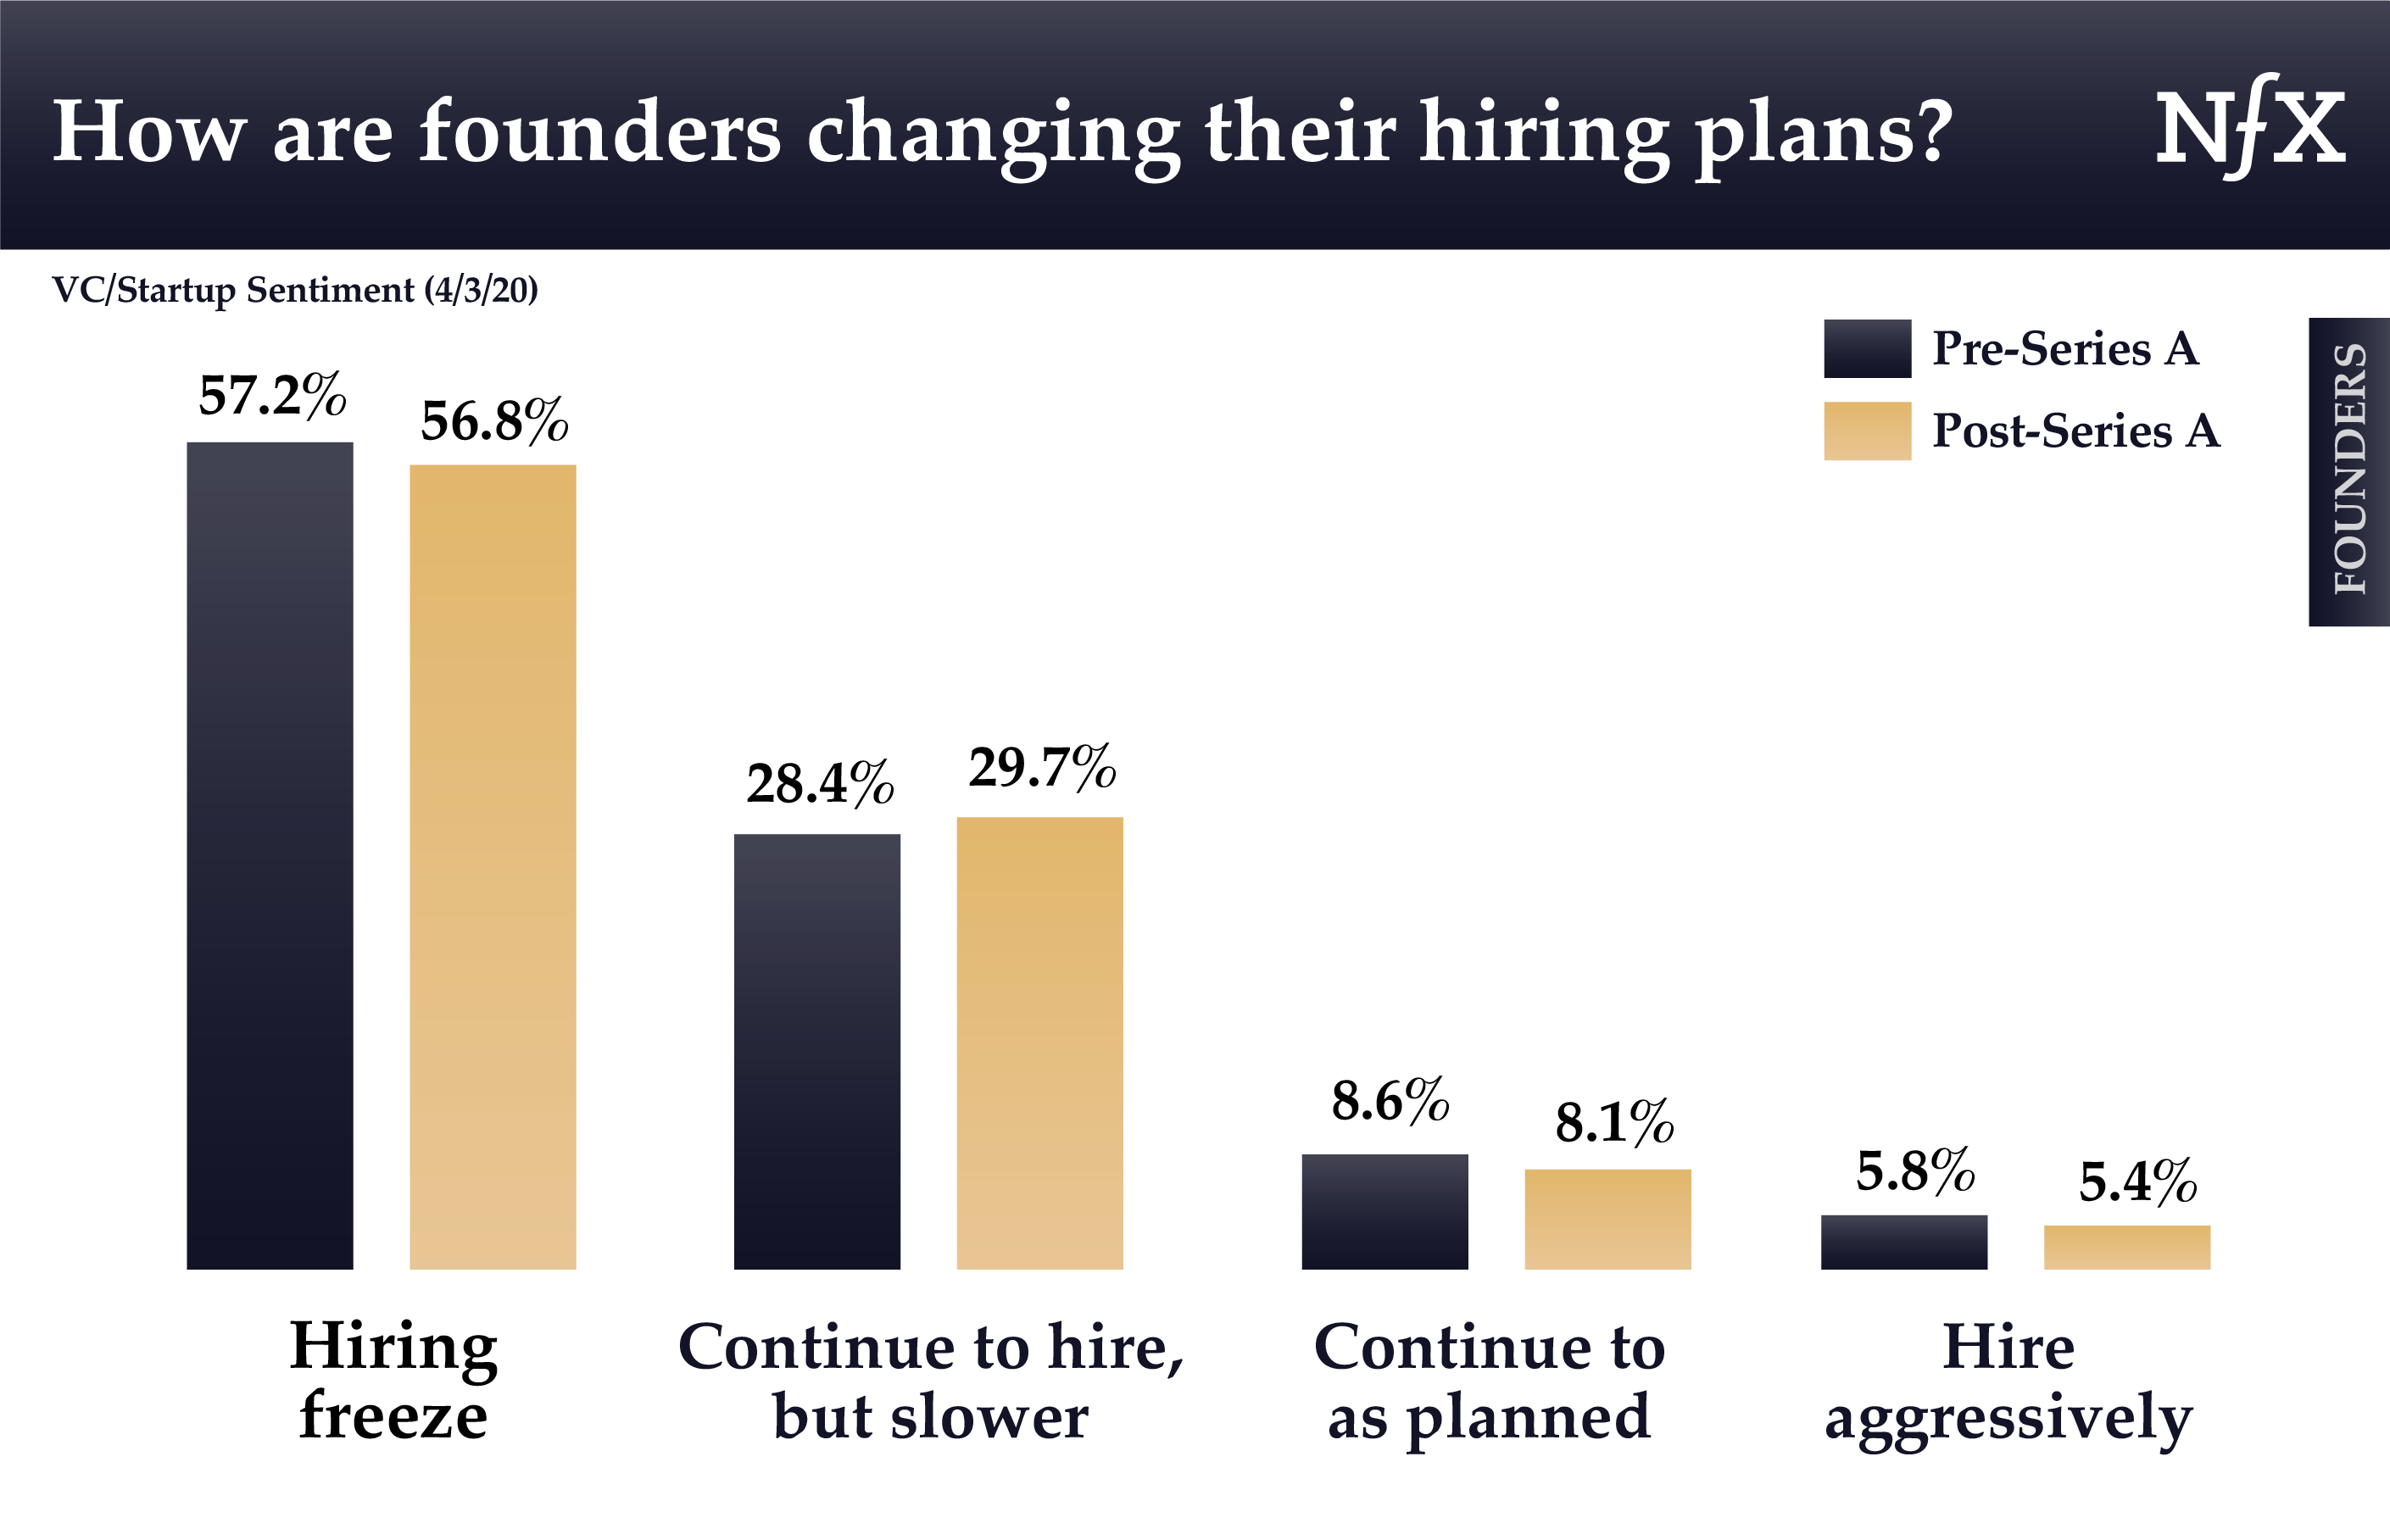 How are founders' changing their hiring plans during COVID-19?